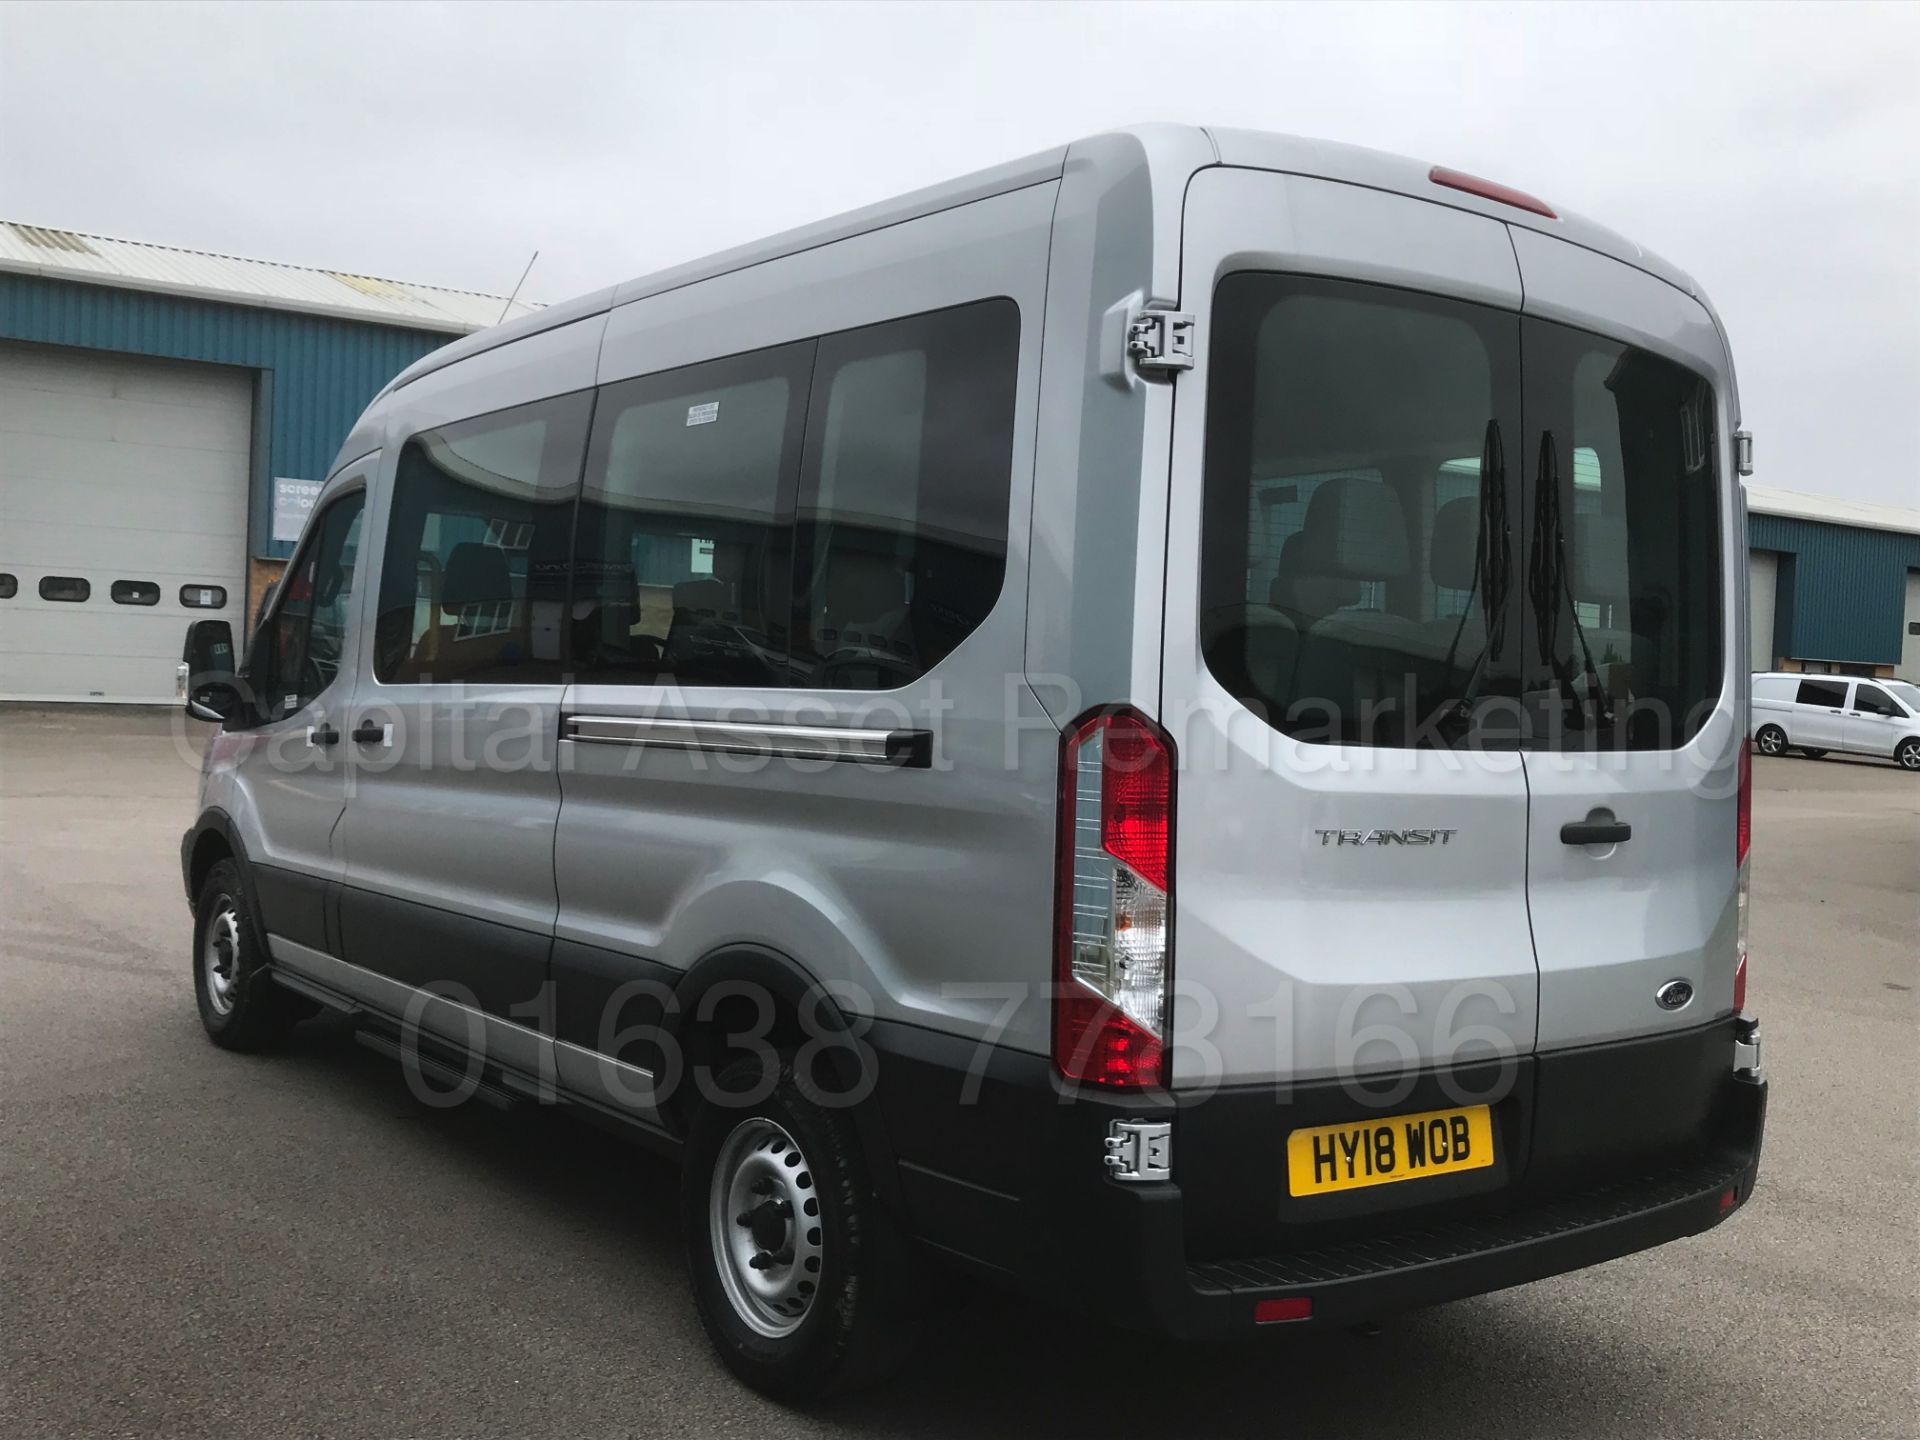 (On Sale) FORD TRANSIT LWB '15 SEATER MINI-BUS' (2018) '2.2 TDCI -125 BHP- 6 SPEED' 130 MILES ONLY ! - Image 10 of 50